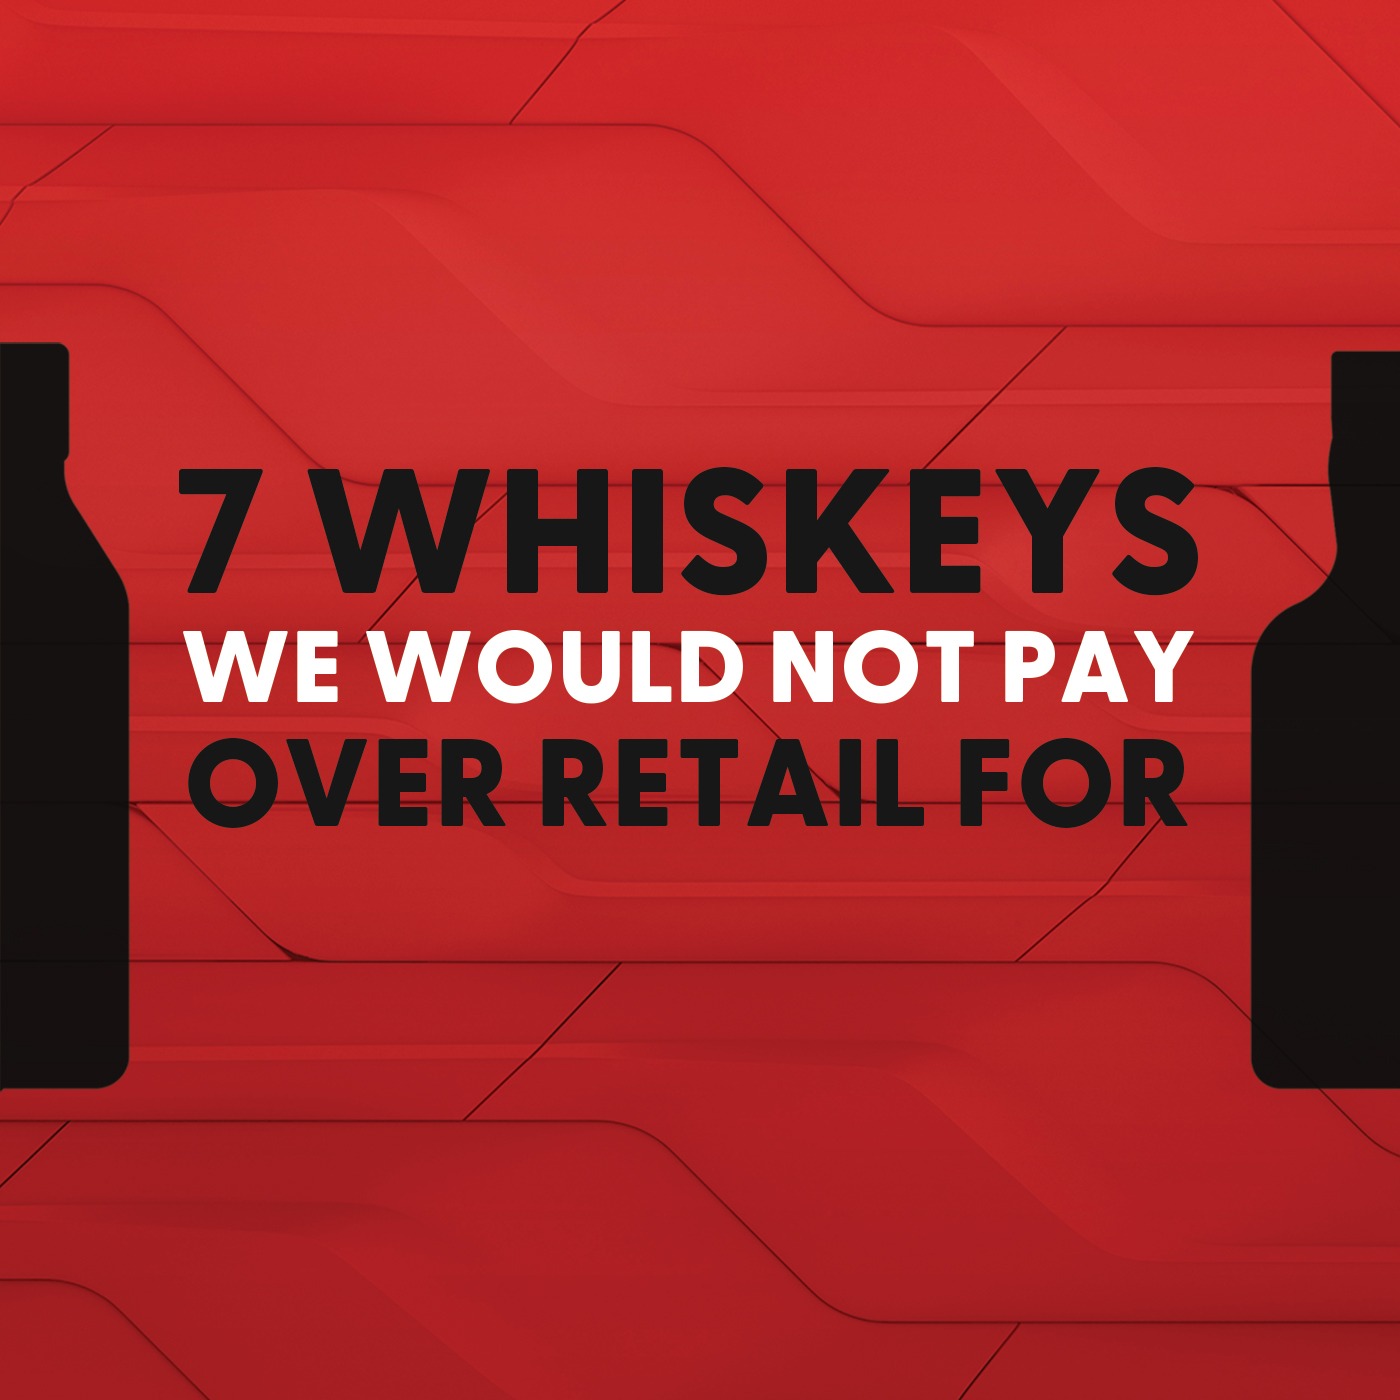 7 Whiskeys We Would Not Pay Over Retail For